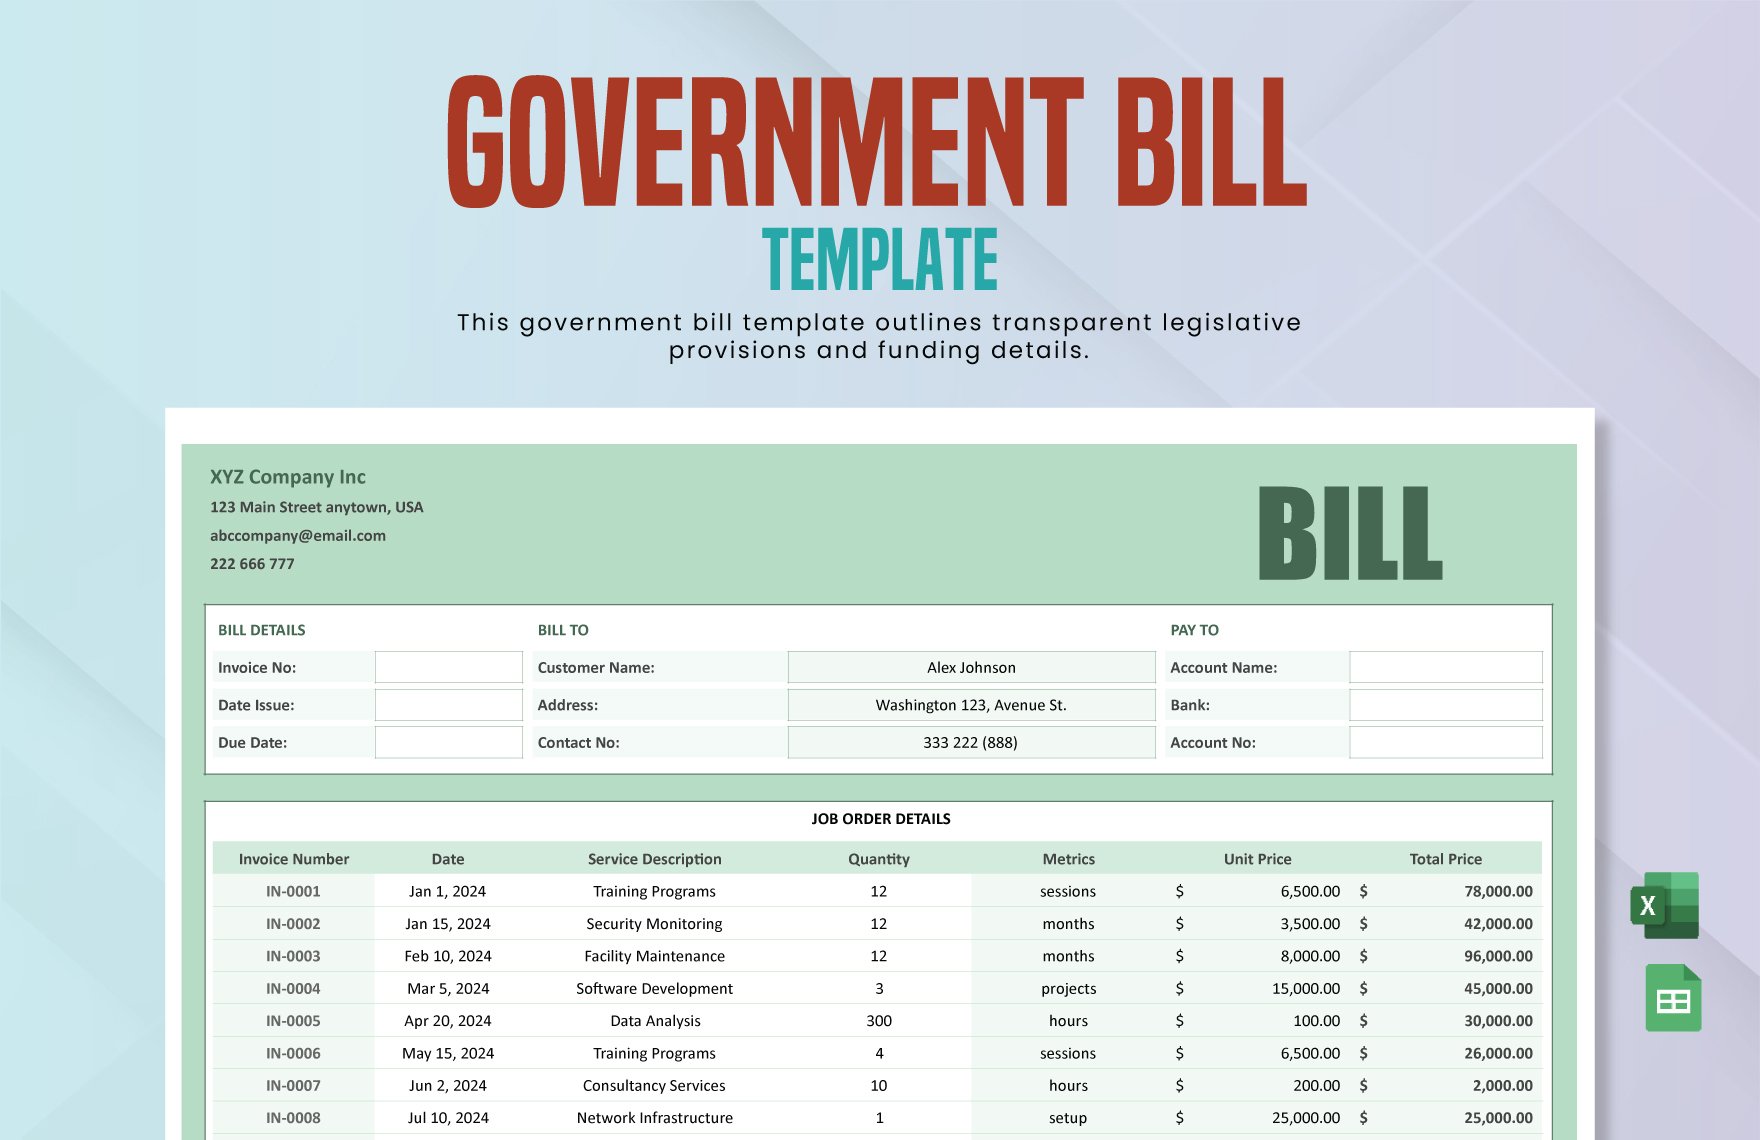 Government Bill Template in Excel, Google Sheets